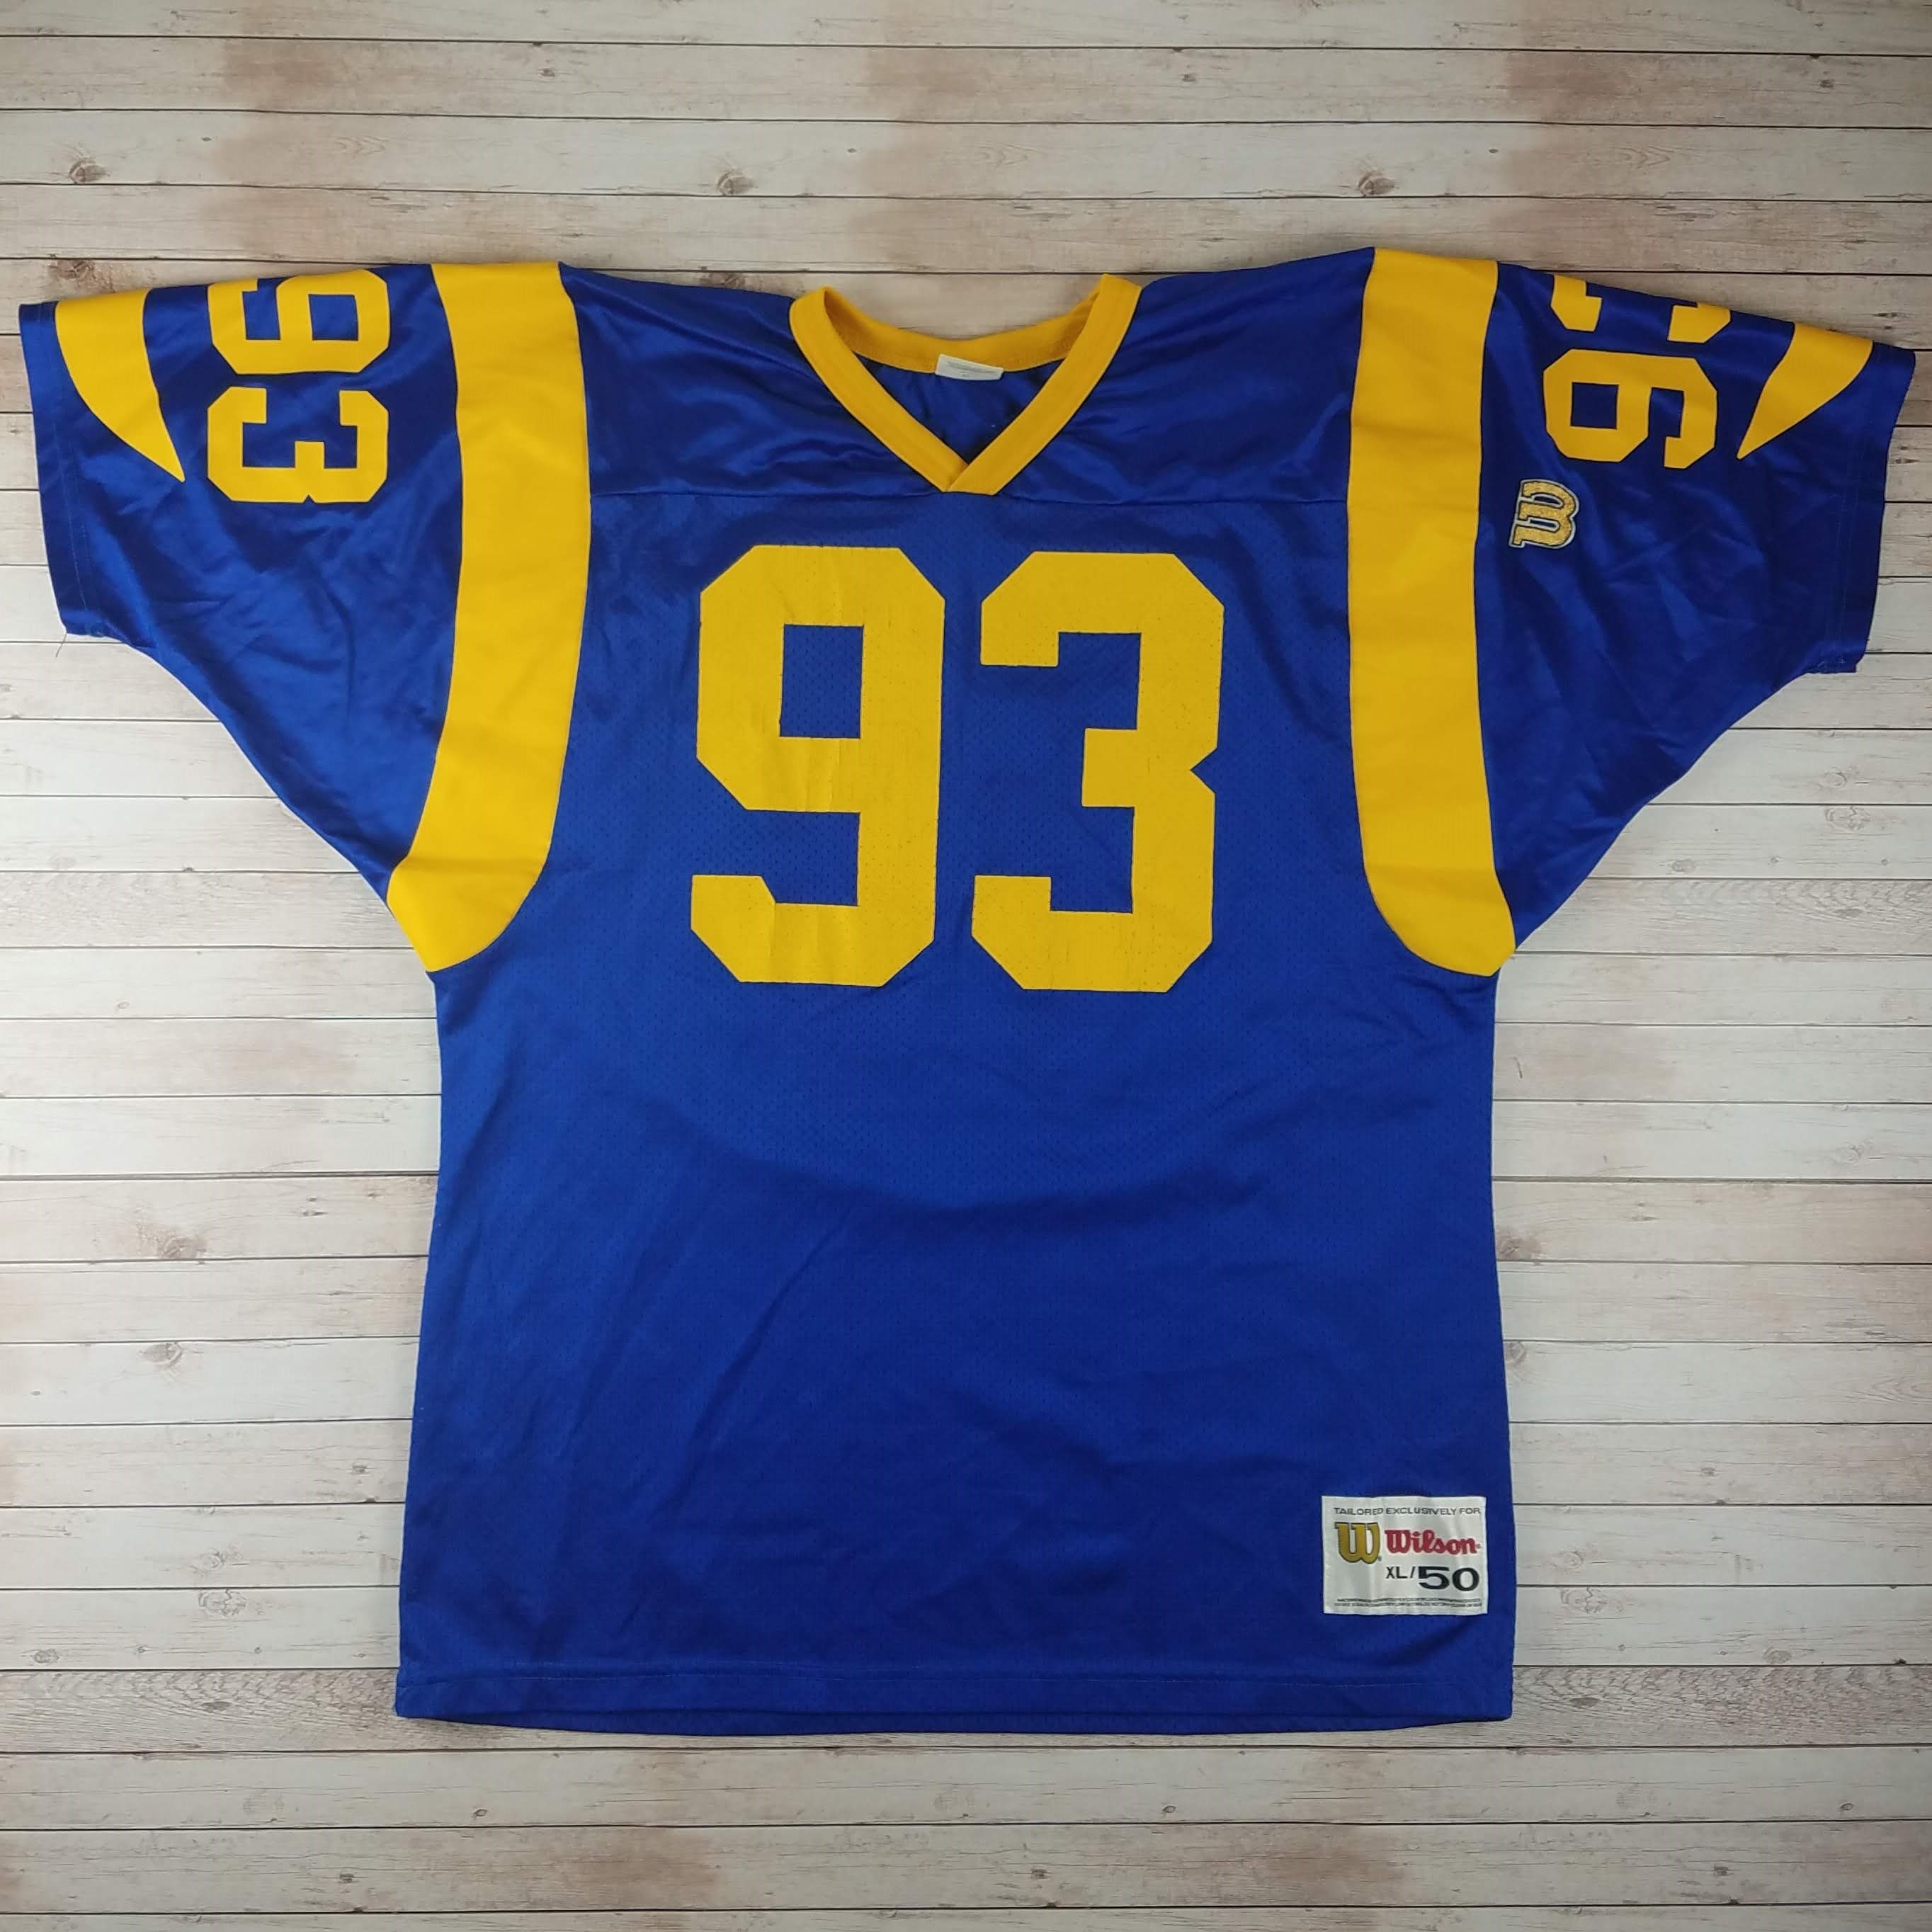 Vintage 1990S Kevin Carter Los Angeles Rams Wilson Nfl Football Jersey Size Xl/50 in Good Condition